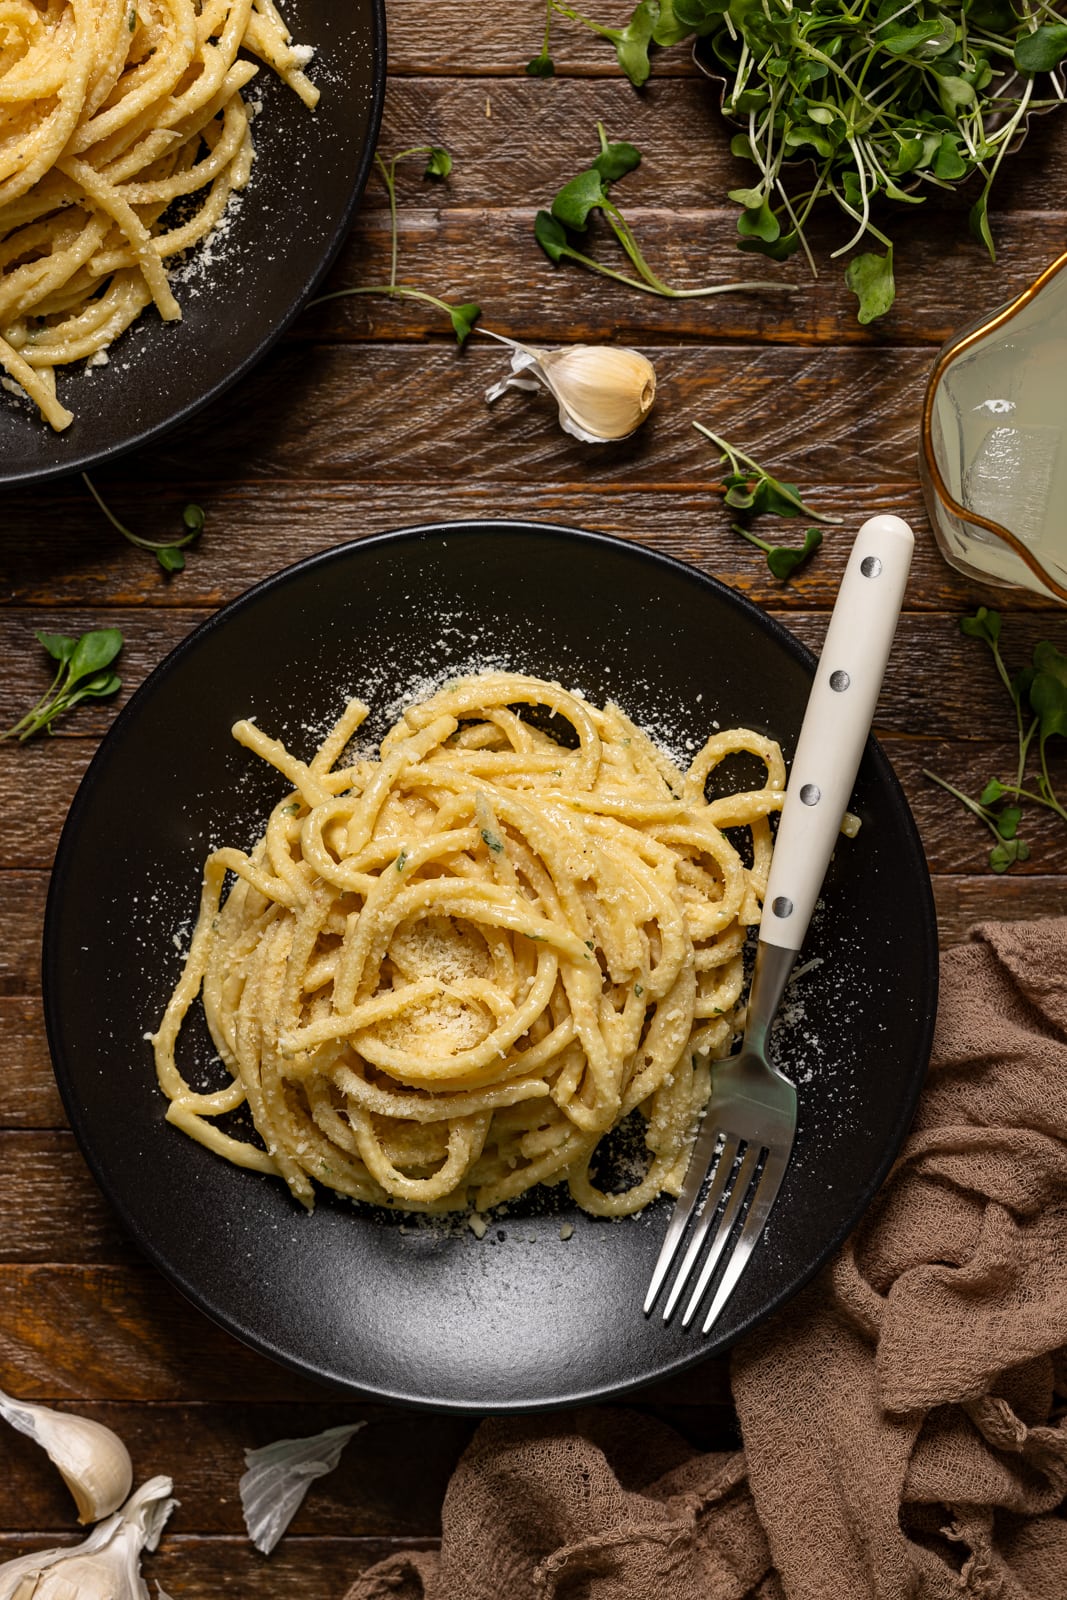 Two plates of pasta on a brown wood table with a fork.